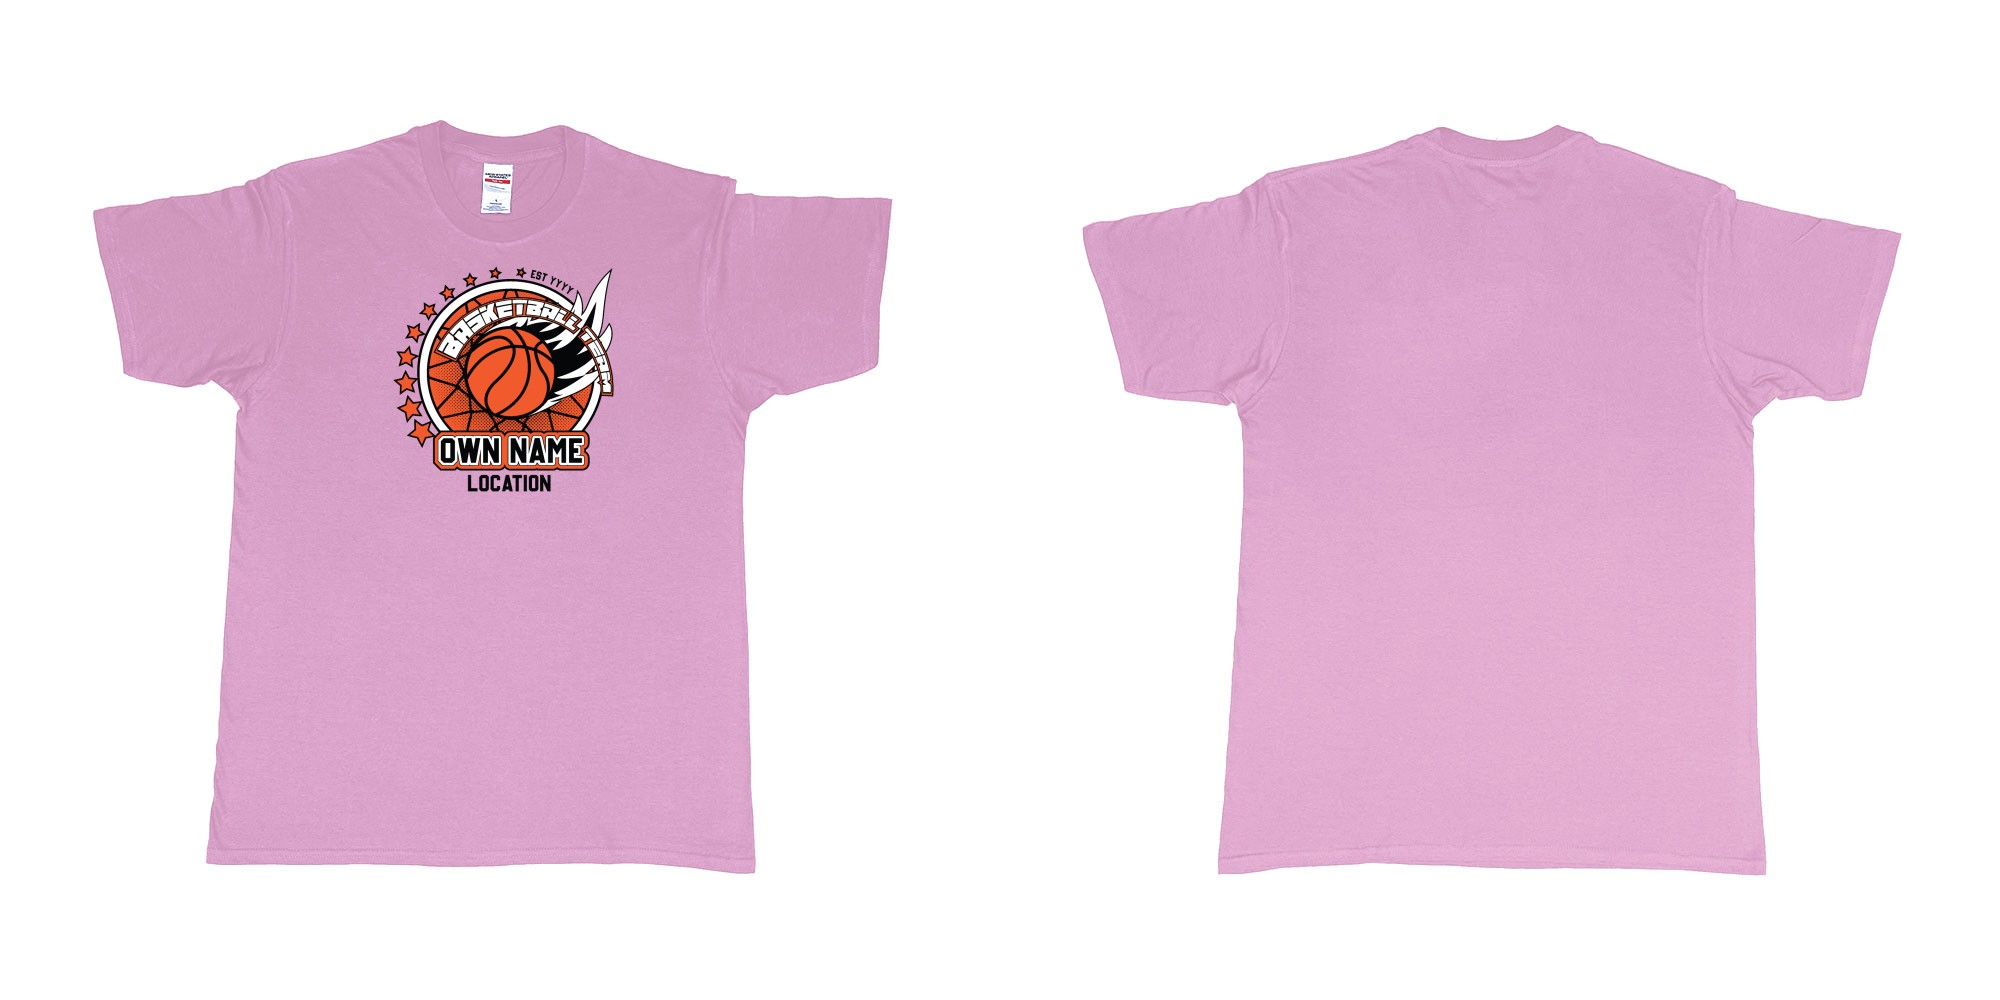 Custom tshirt design basketball team own name location established year custom design production bali in fabric color light-pink choice your own text made in Bali by The Pirate Way